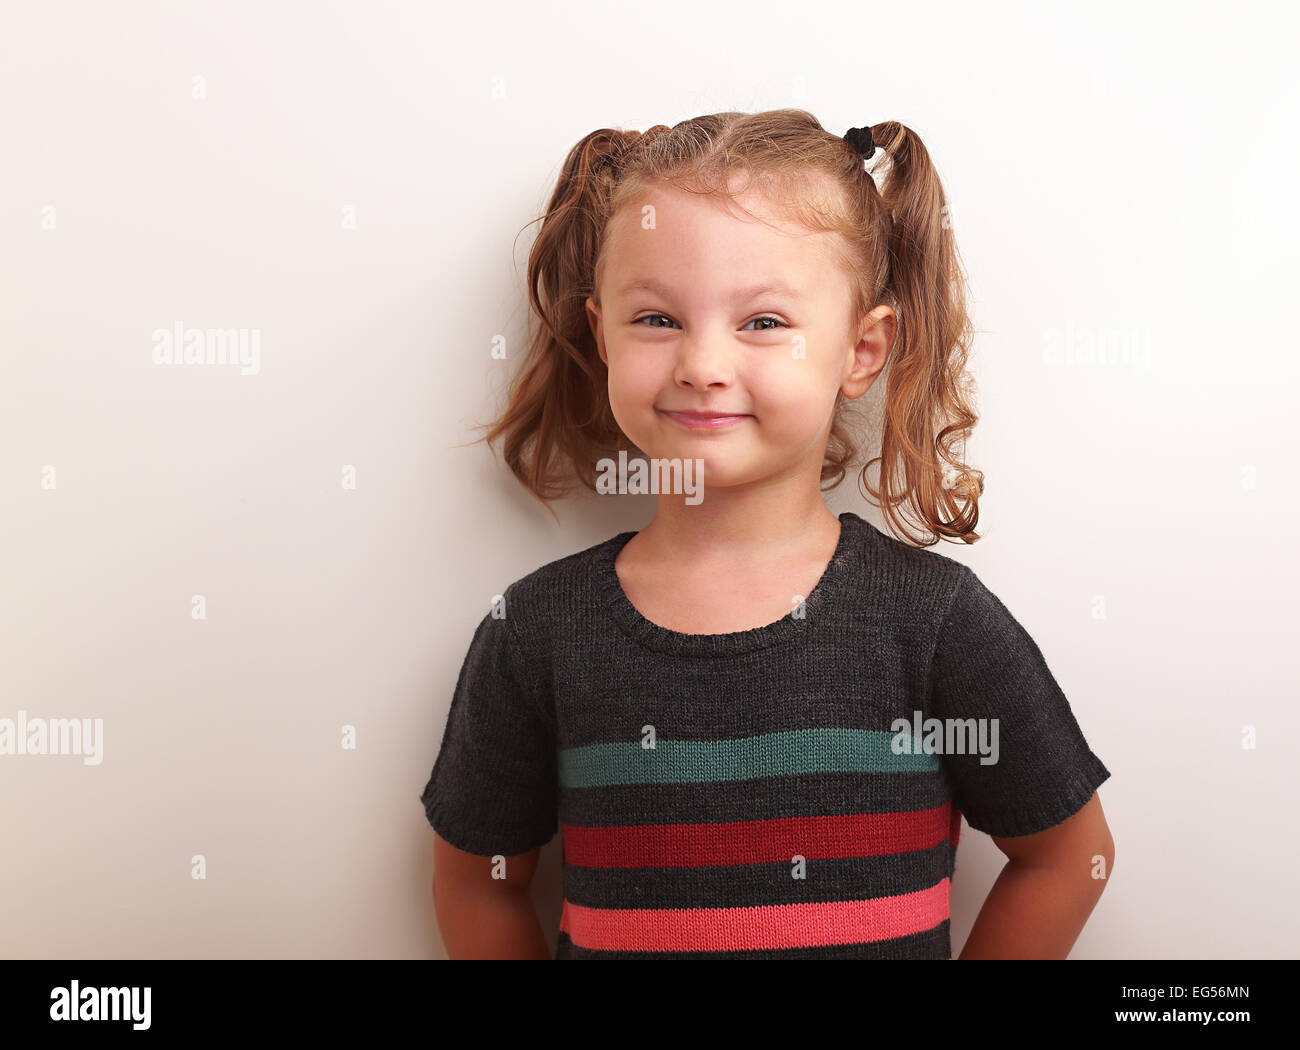 Fun smiling kid girl in dress smiling and looking happy on empty white space background Stock Photo